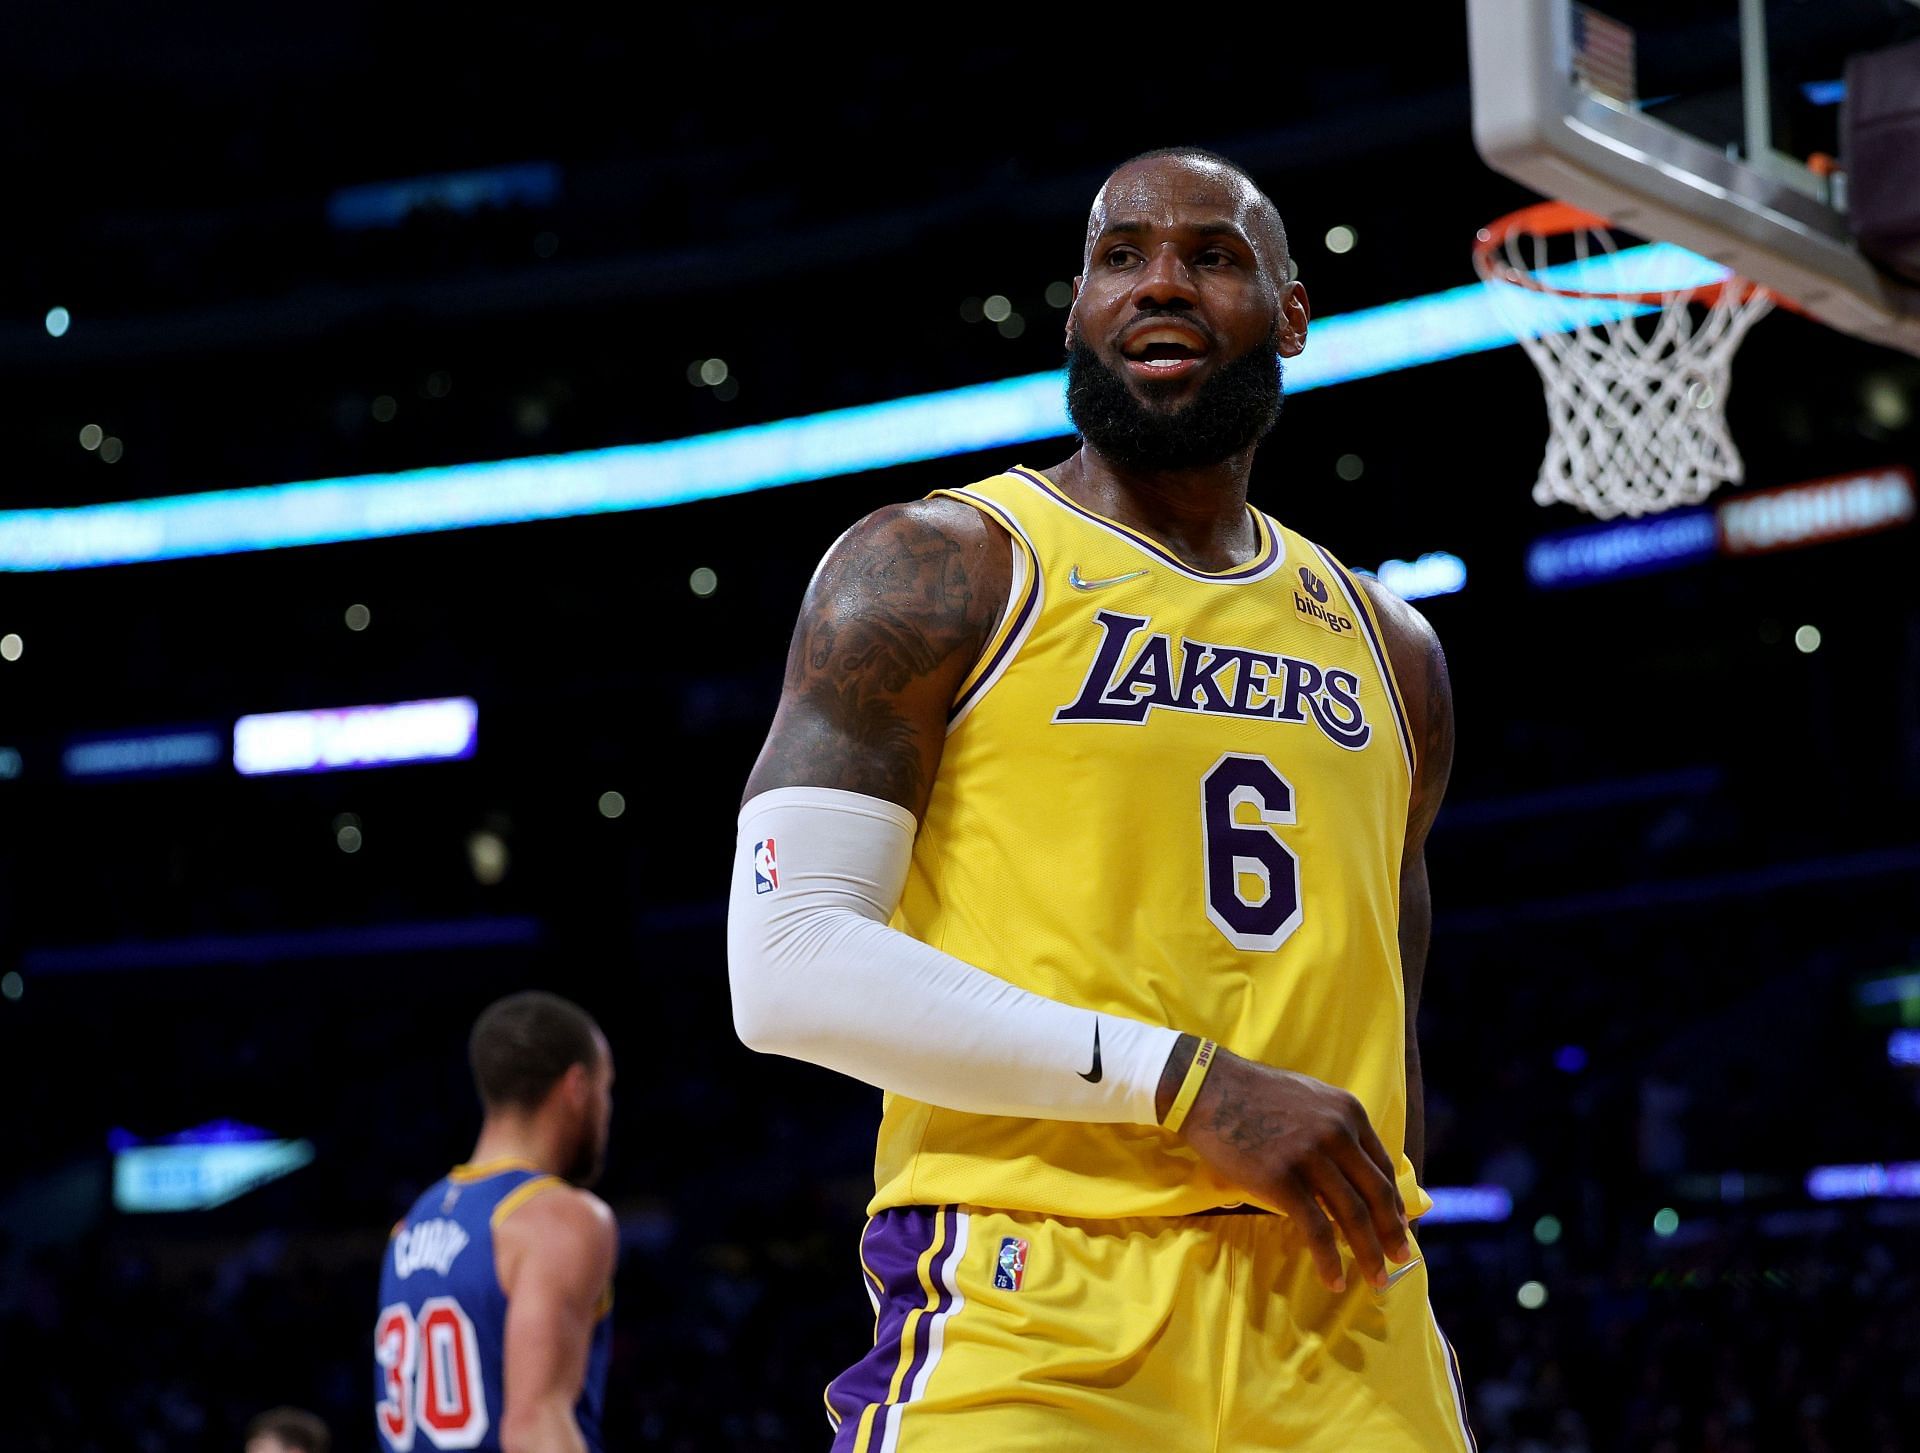 LeBron James in action during Golden State Warriors v LA Lakers game